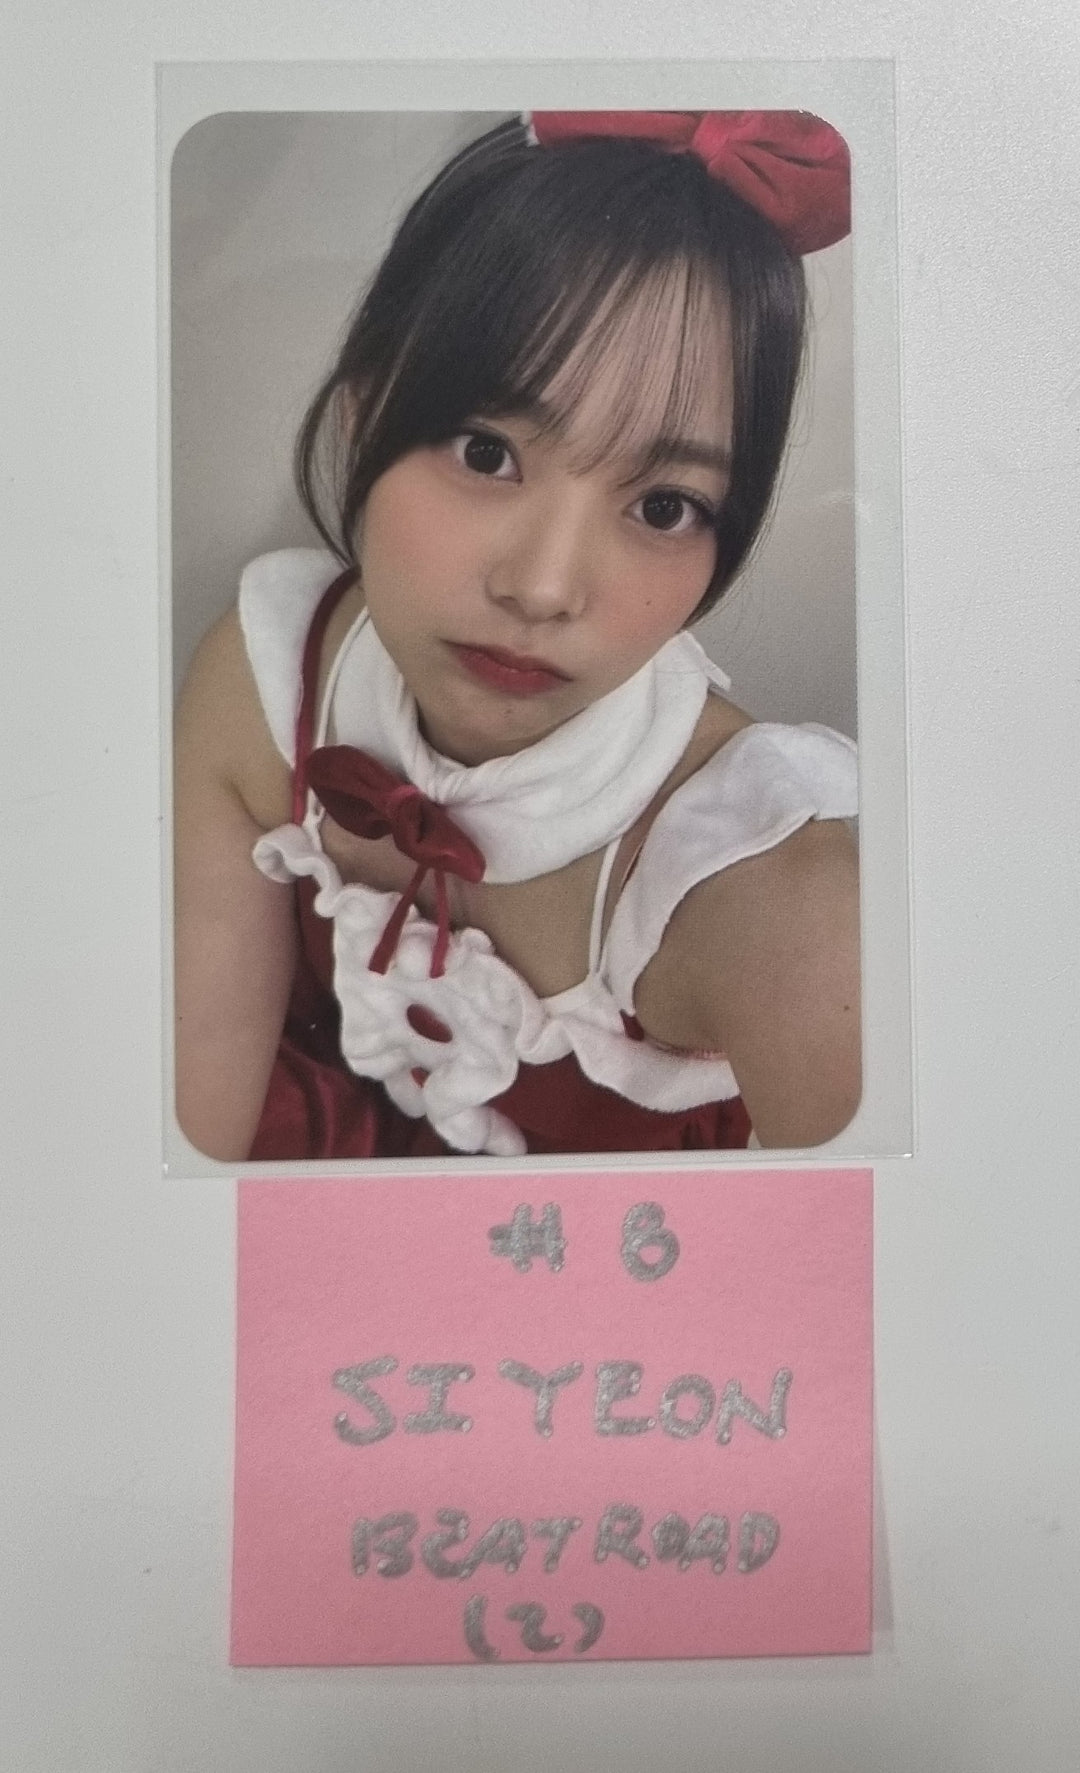 QWER "Harmony from Discord" - Beatroad Fansign Event Photocard Round 2 [24.1.9]